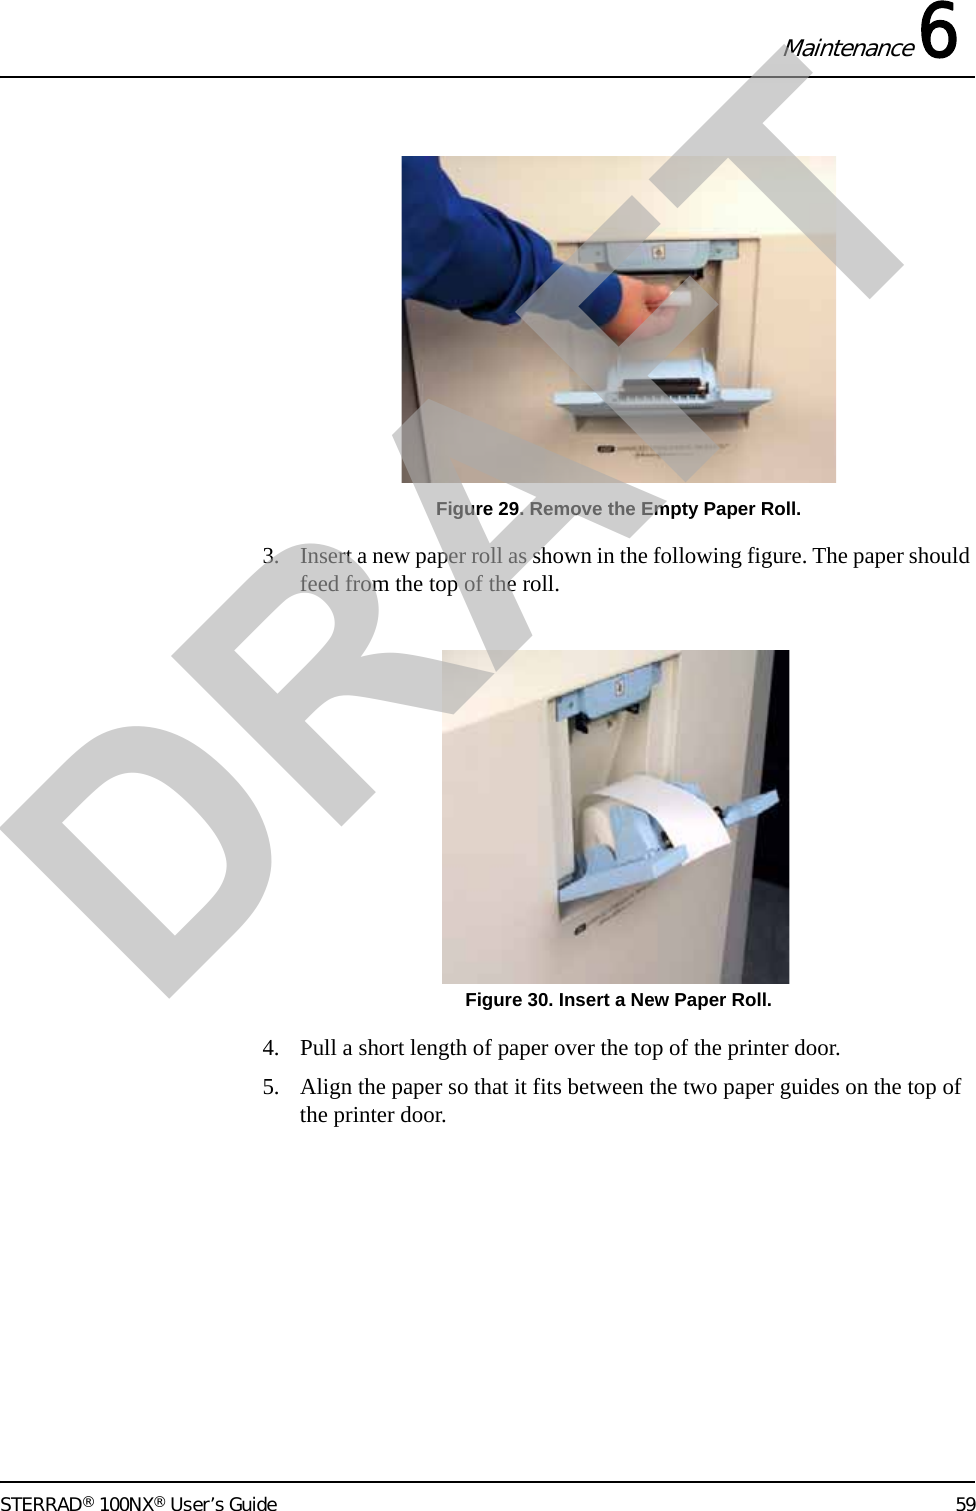 Maintenance 6STERRAD® 100NX® User’s Guide 59Figure 29. Remove the Empty Paper Roll.3. Insert a new paper roll as shown in the following figure. The paper should feed from the top of the roll. Figure 30. Insert a New Paper Roll.4. Pull a short length of paper over the top of the printer door.5. Align the paper so that it fits between the two paper guides on the top of the printer door.DRAFT